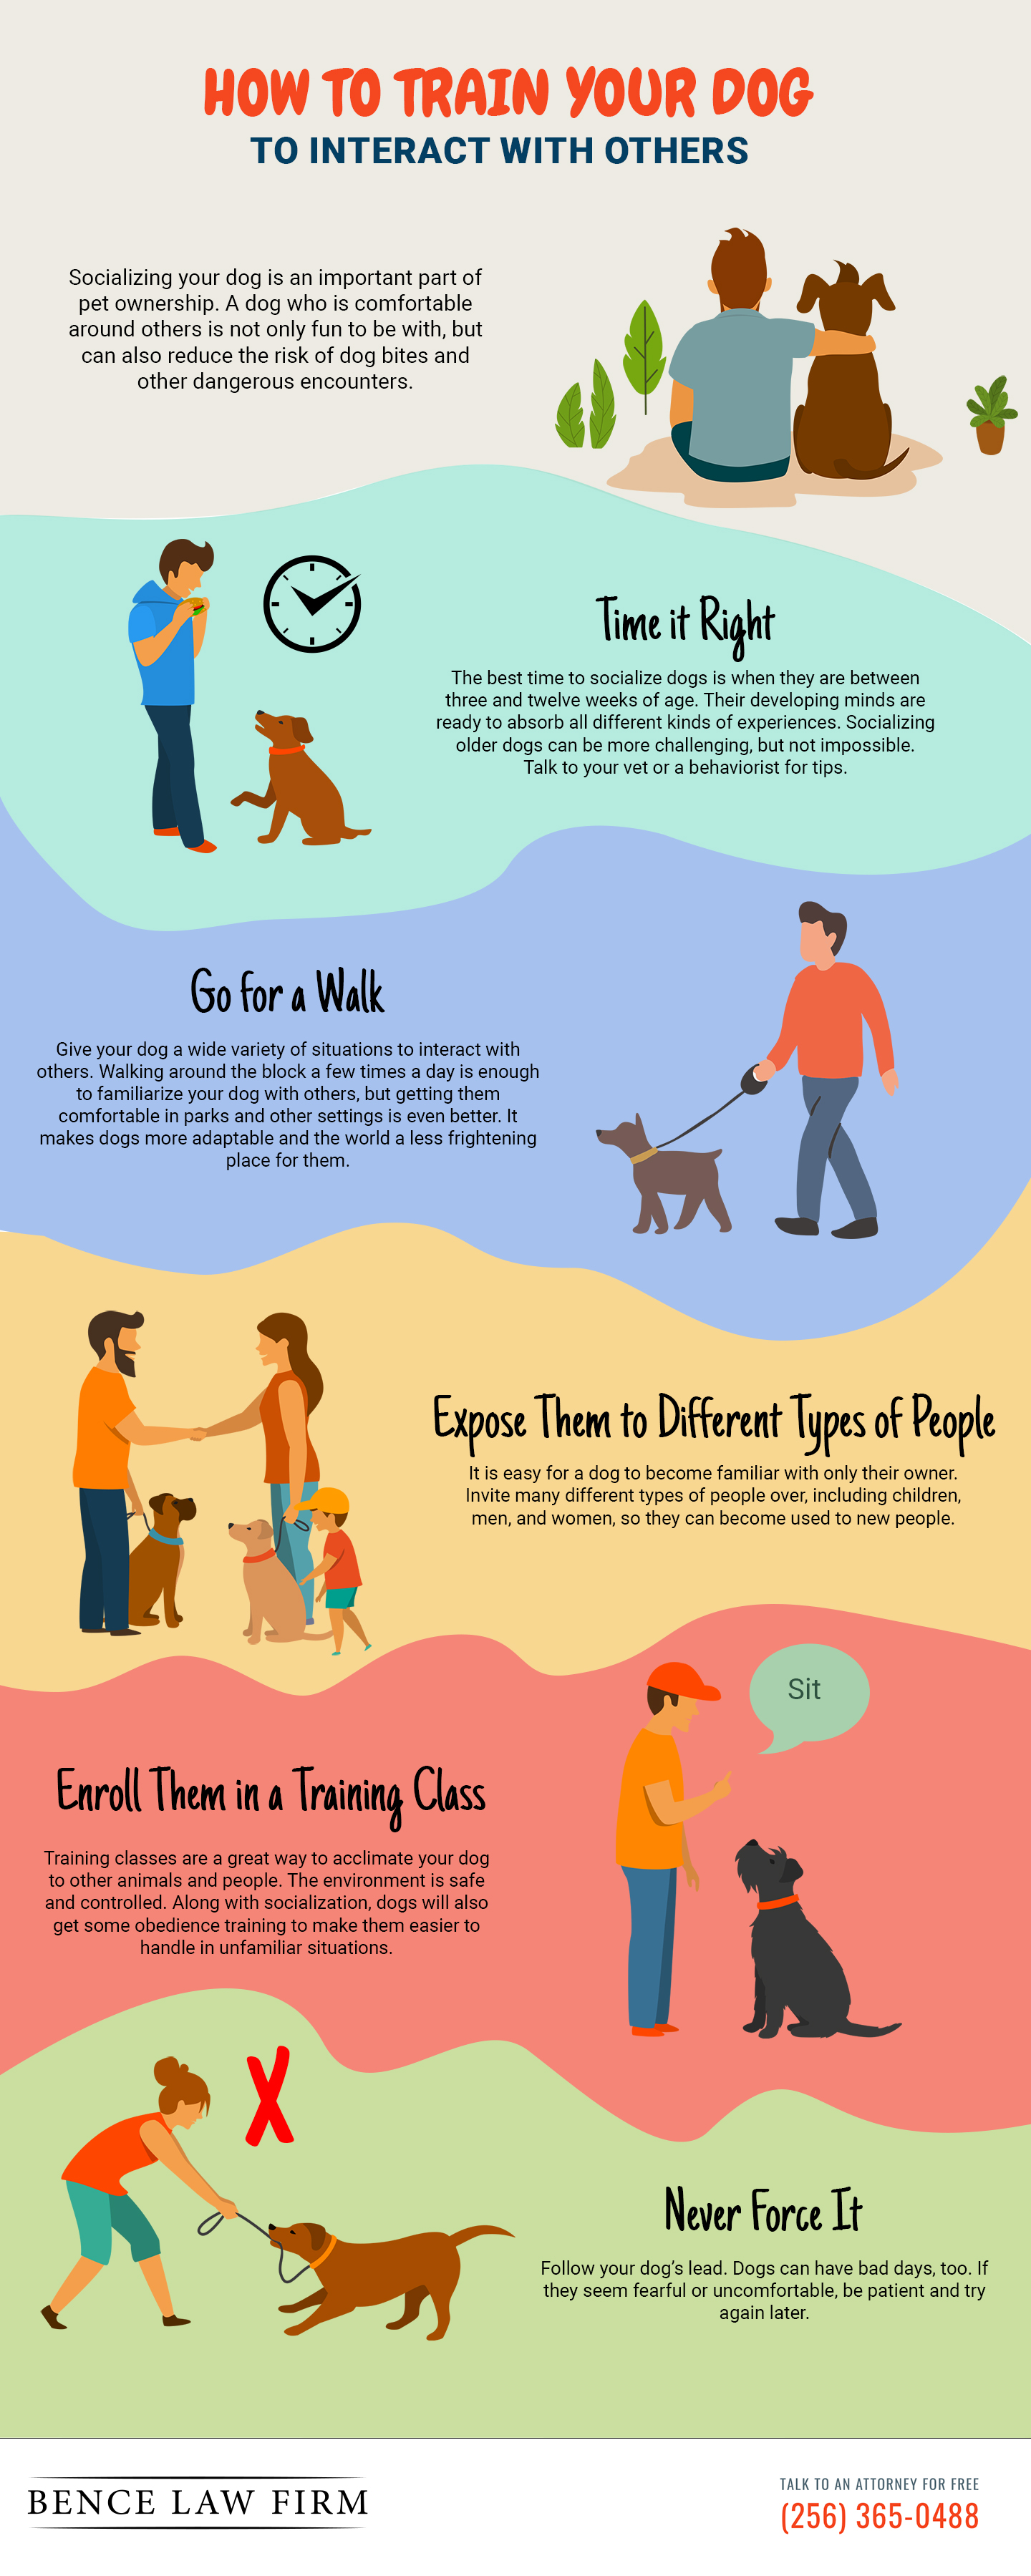 HOW TO TRAIN YOUR DOG
TO INTERACT WITH OTHERS